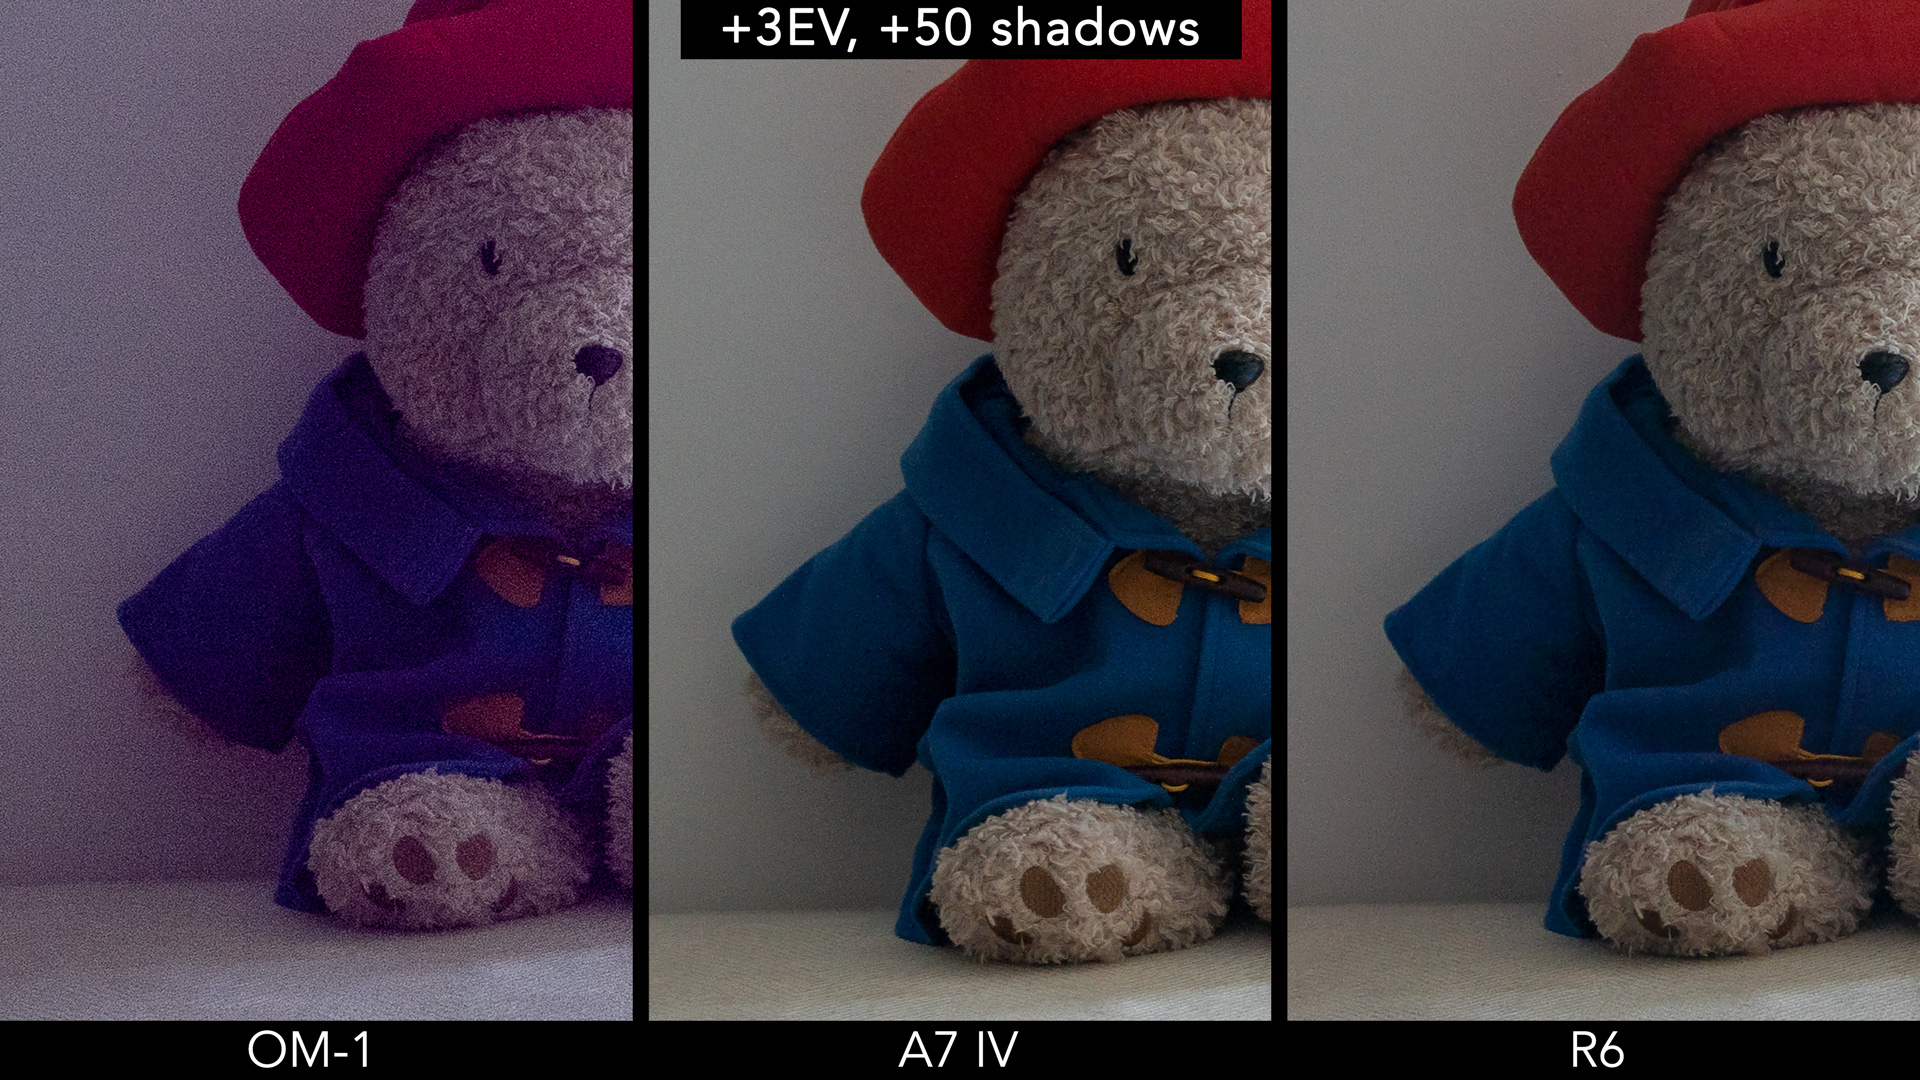 side by side crop showing the difference in noise between the E-M1 III and OM-1 with 3 stops and +50 shadows recovery